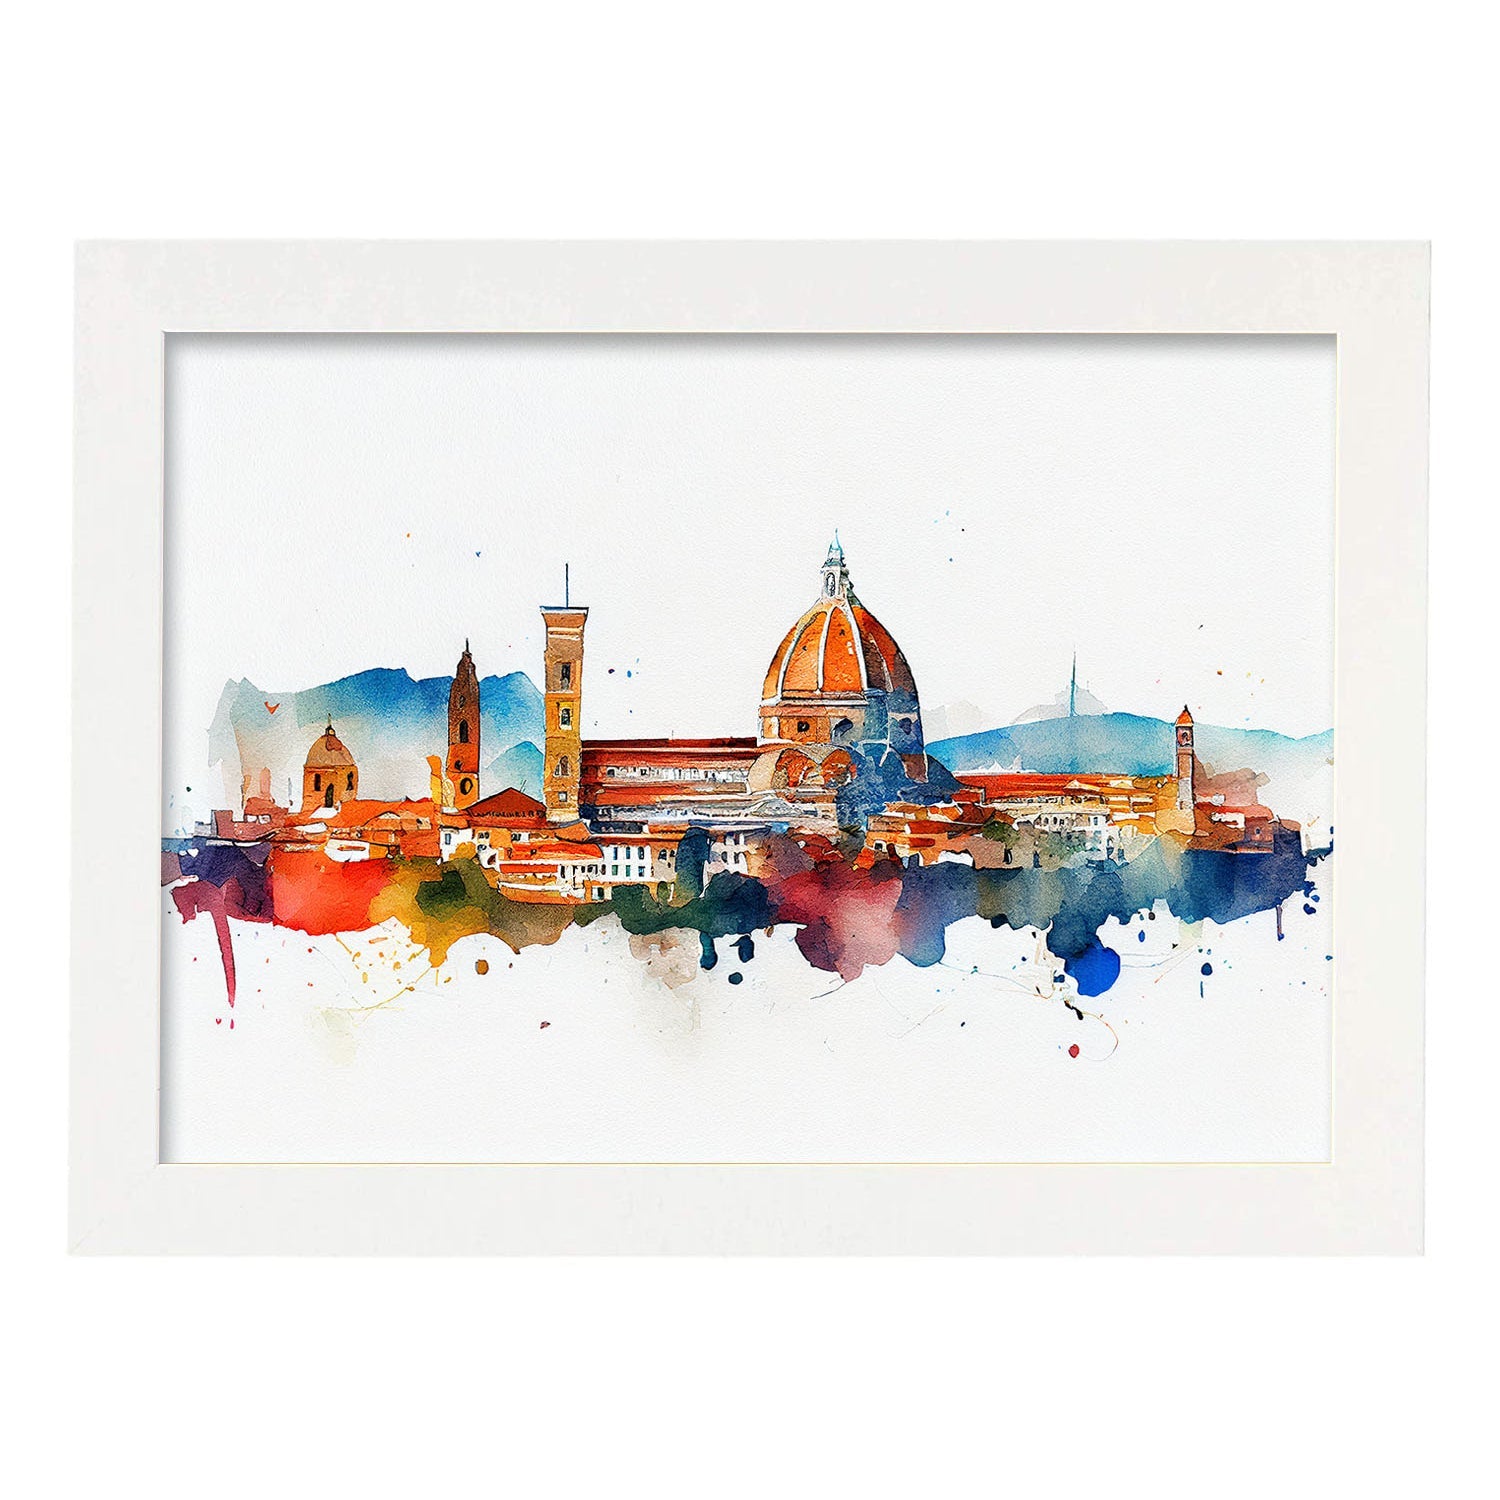 Nacnic watercolor of a skyline of the city of Florence_1. Aesthetic Wall Art Prints for Bedroom or Living Room Design.-Artwork-Nacnic-A4-Marco Blanco-Nacnic Estudio SL